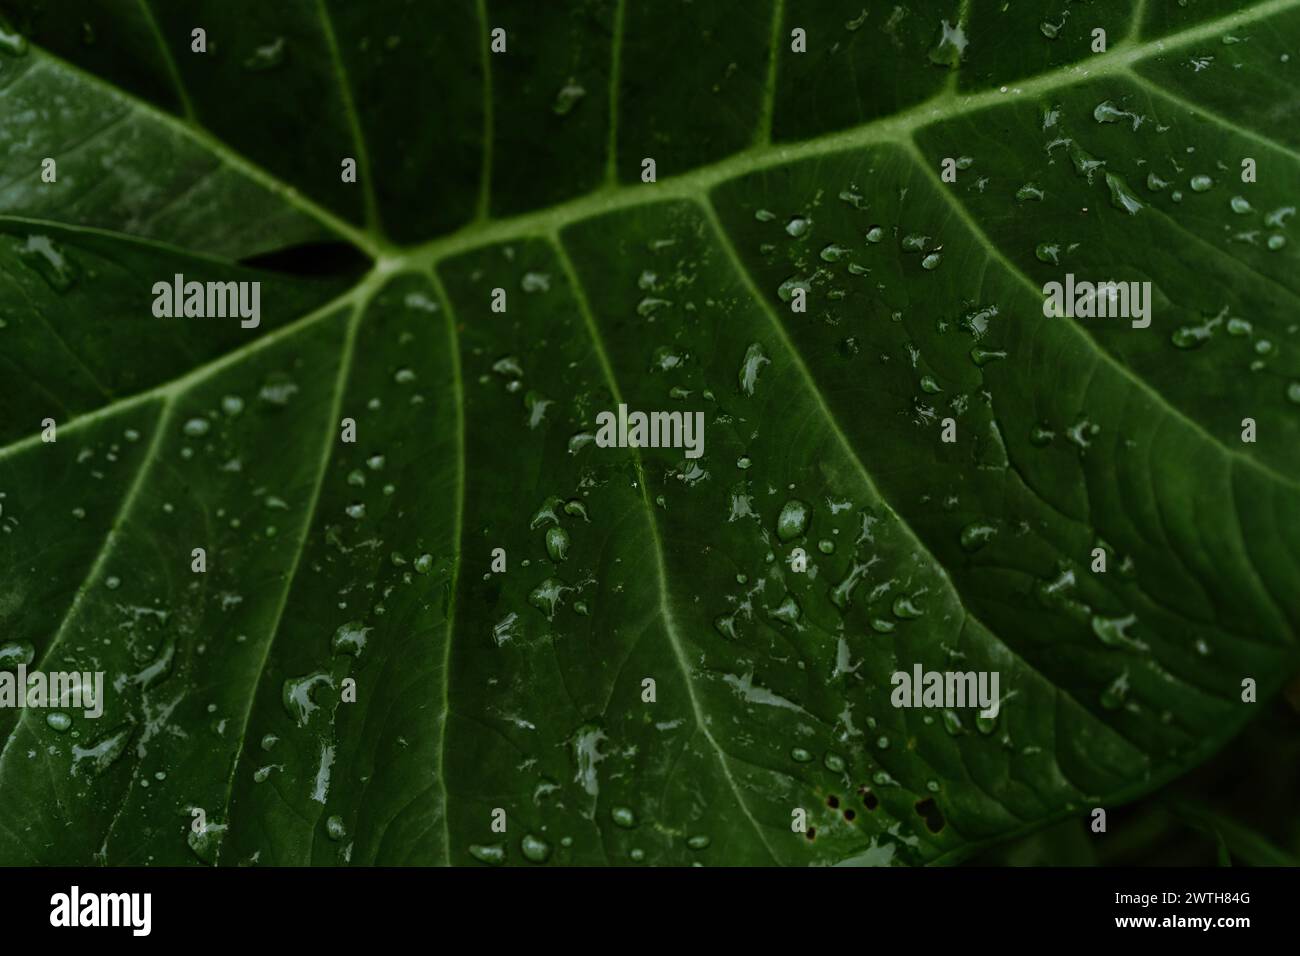 Jungle, tropical leaf with dew drops, close-up. Stock Photo